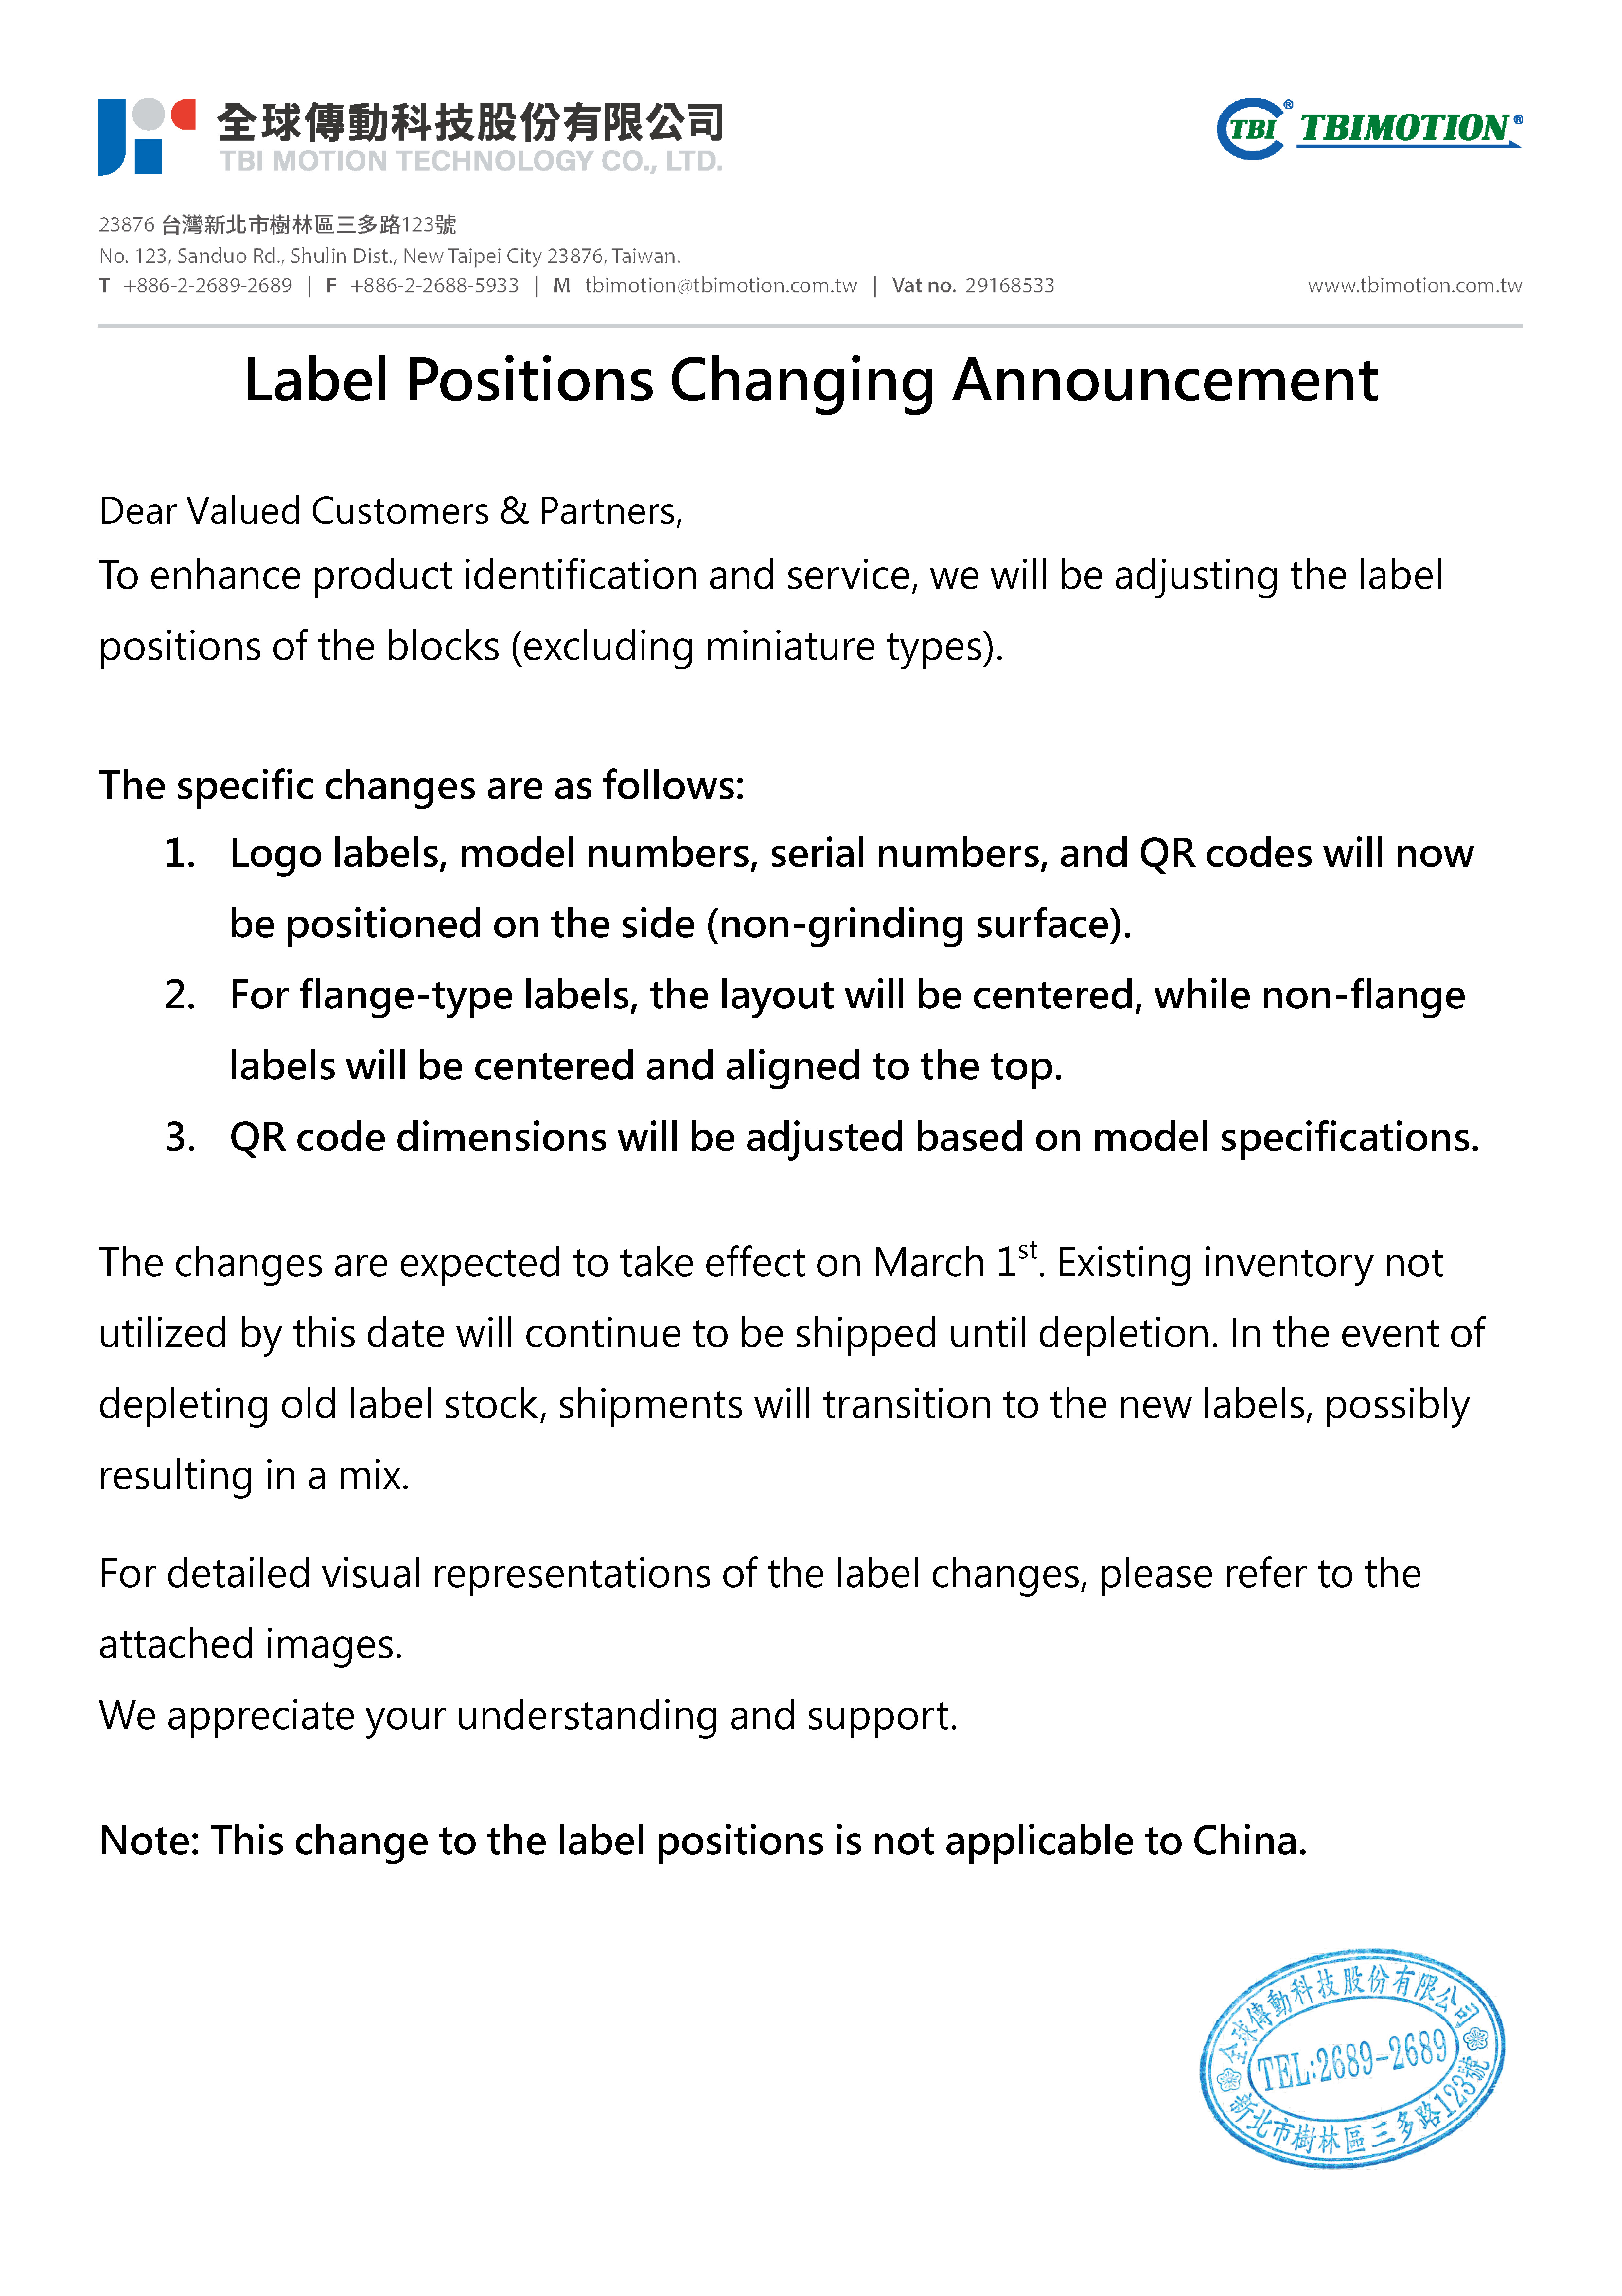 Label Positions Changing Announcement